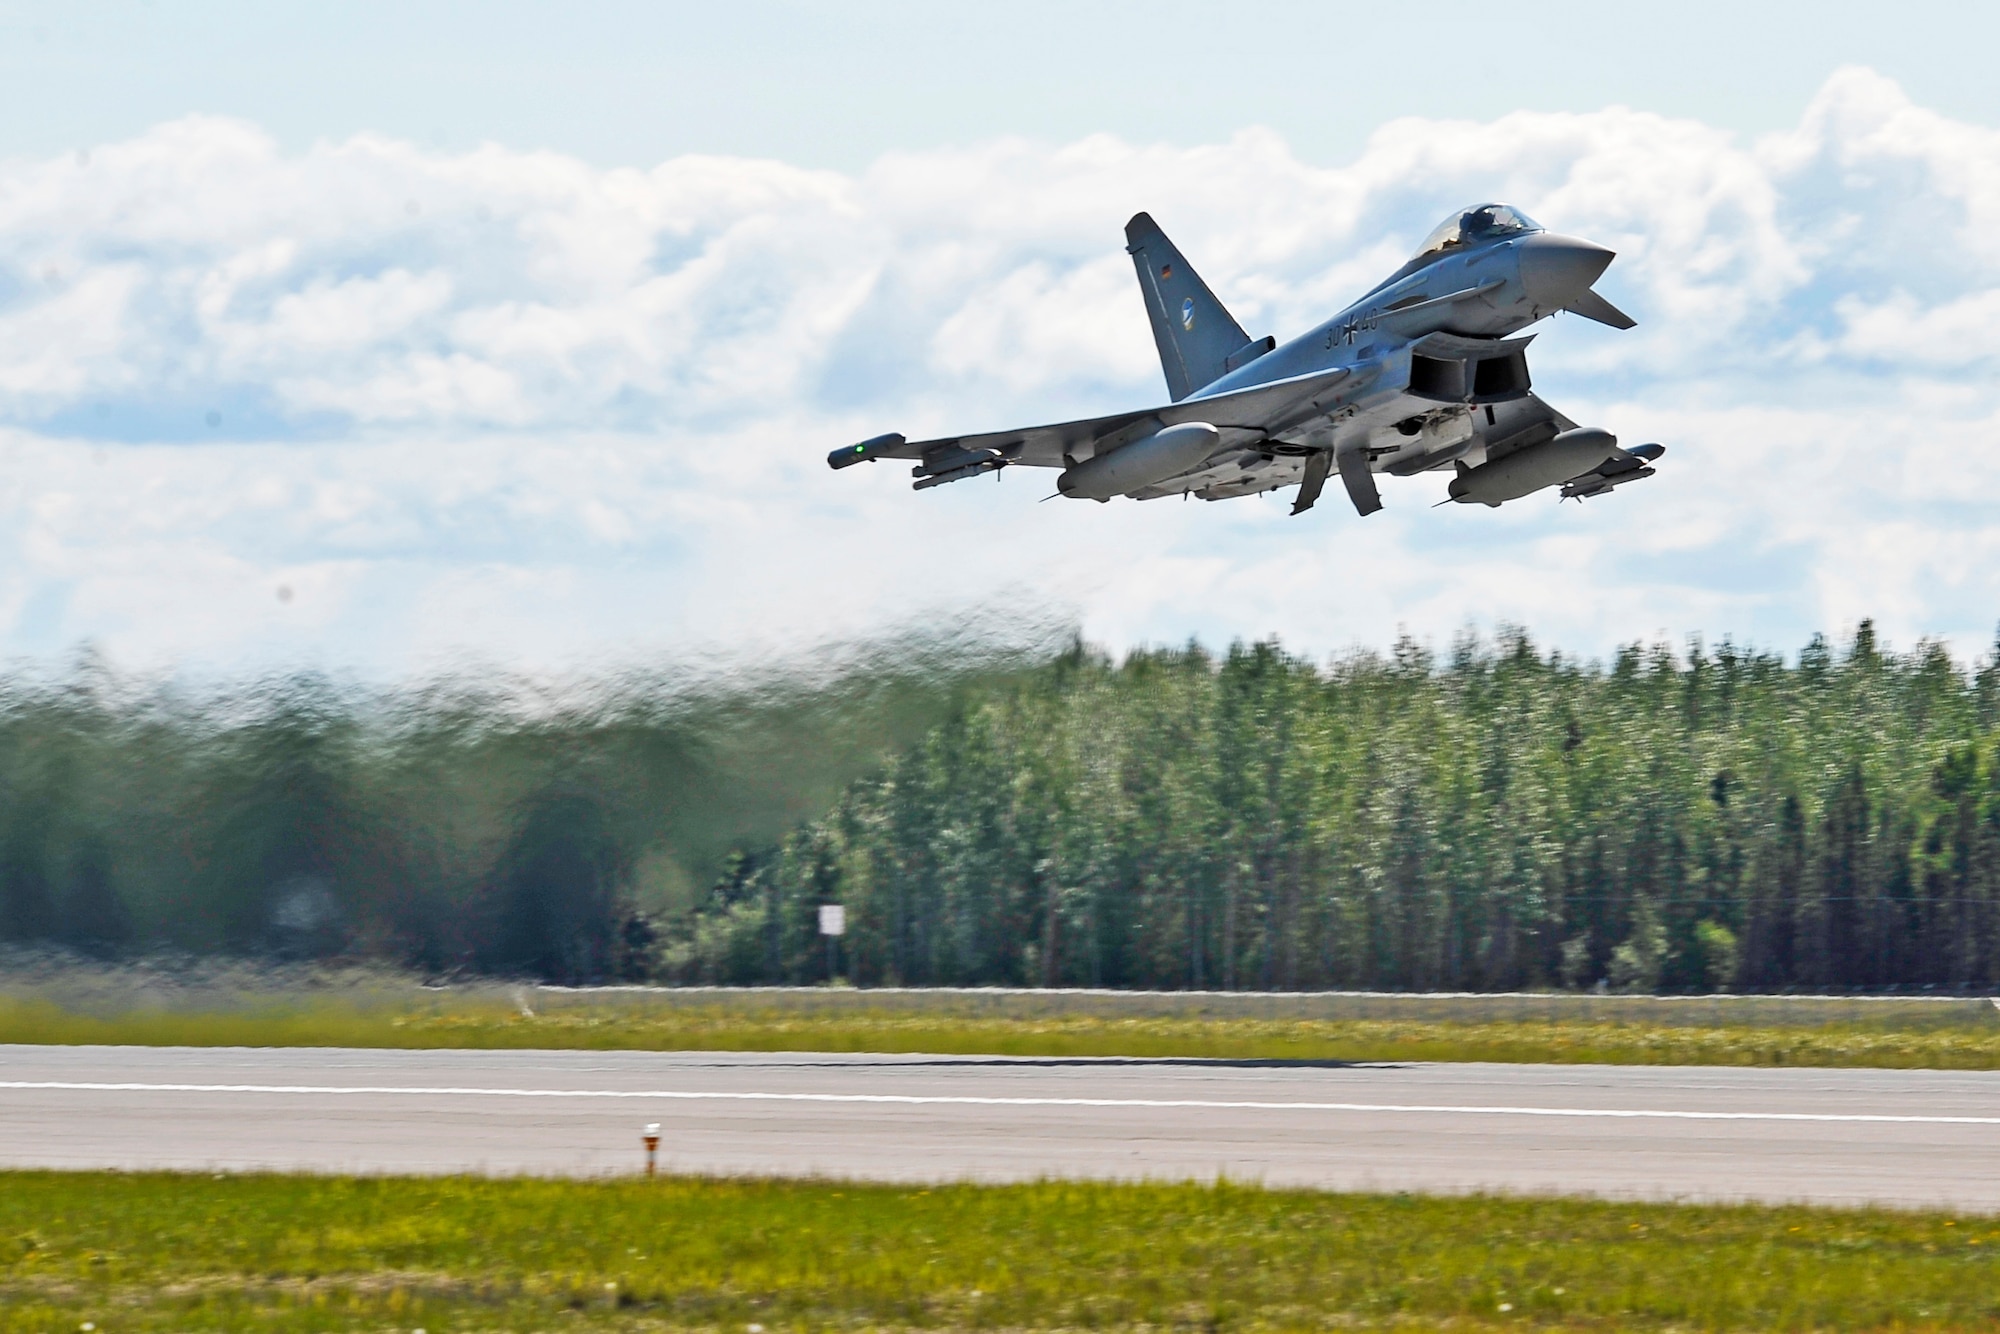 A German air force Eurofighter Typhoon launches from the runway June 4, 2012, Eielson Air Force Base, Alaska.  The GAF is participating in RED FLAG-Alaska 12-2, a two-week-long exercise providing aircrew realistic combat sorties and increasing their chances of survival in combat.  (U.S. Air Force photo/Staff Sgt. Miguel Lara III)